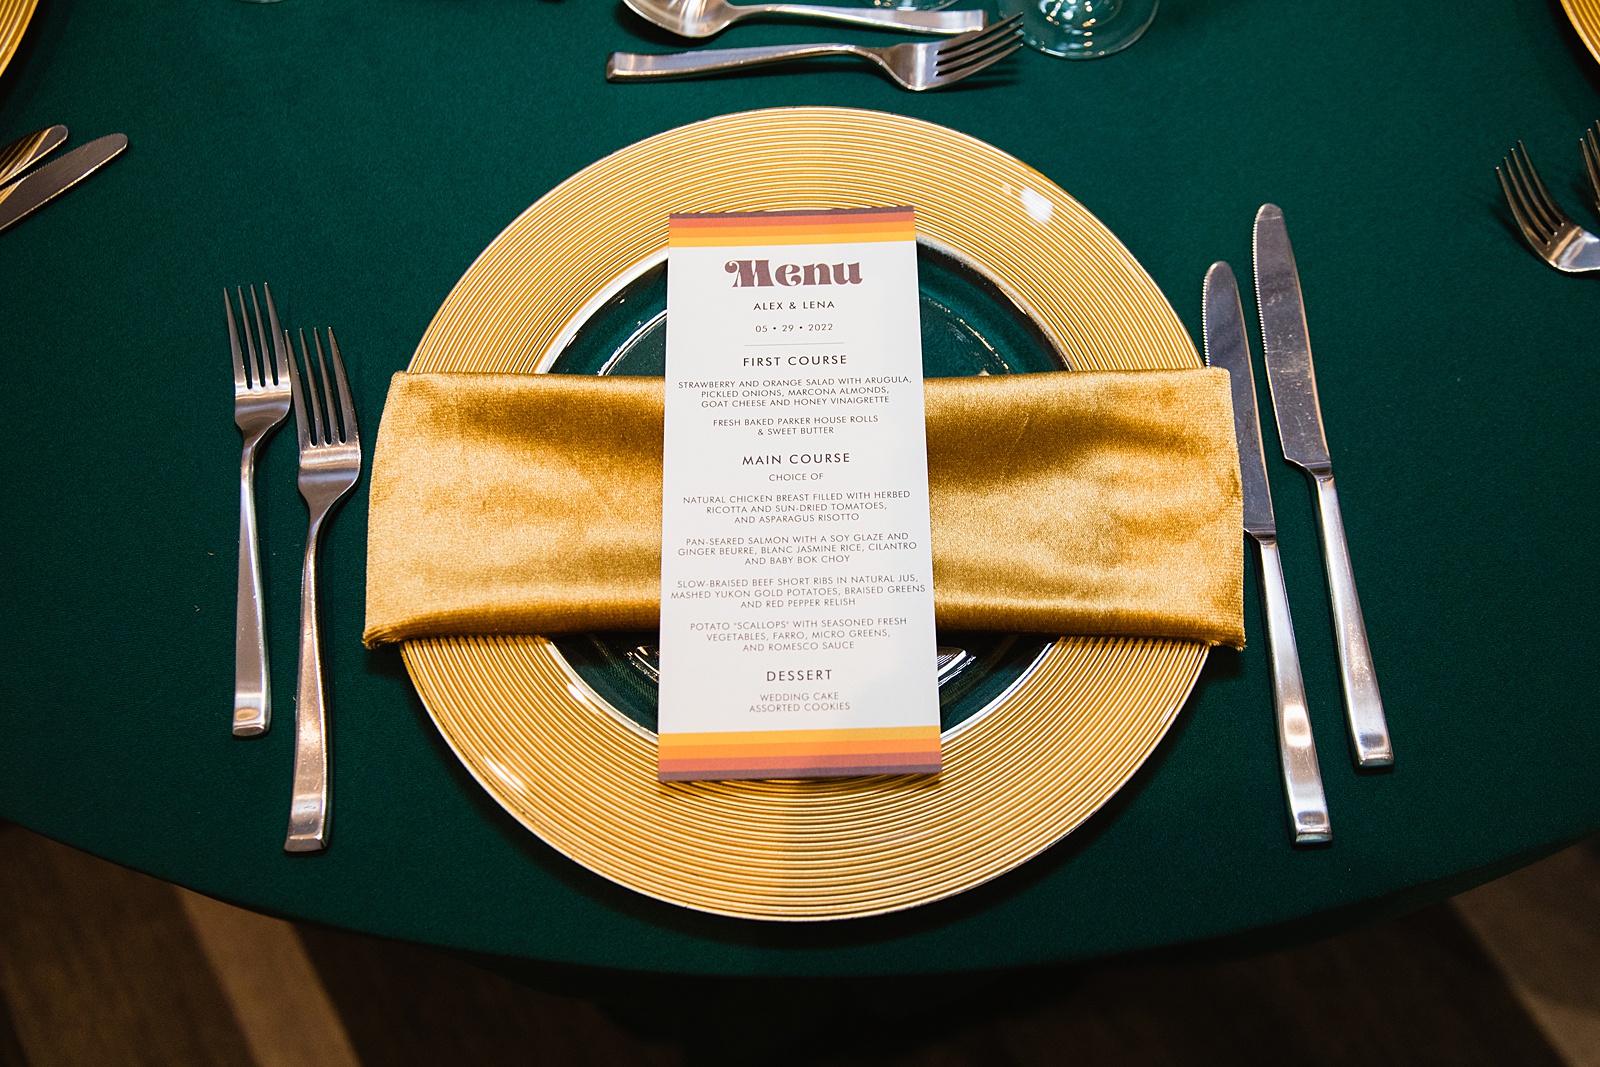 Retro Mid Century Modern menu and place settings at Mountain Shadows Resort wedding reception by Paradise Valley wedding photographer PMA Photography.